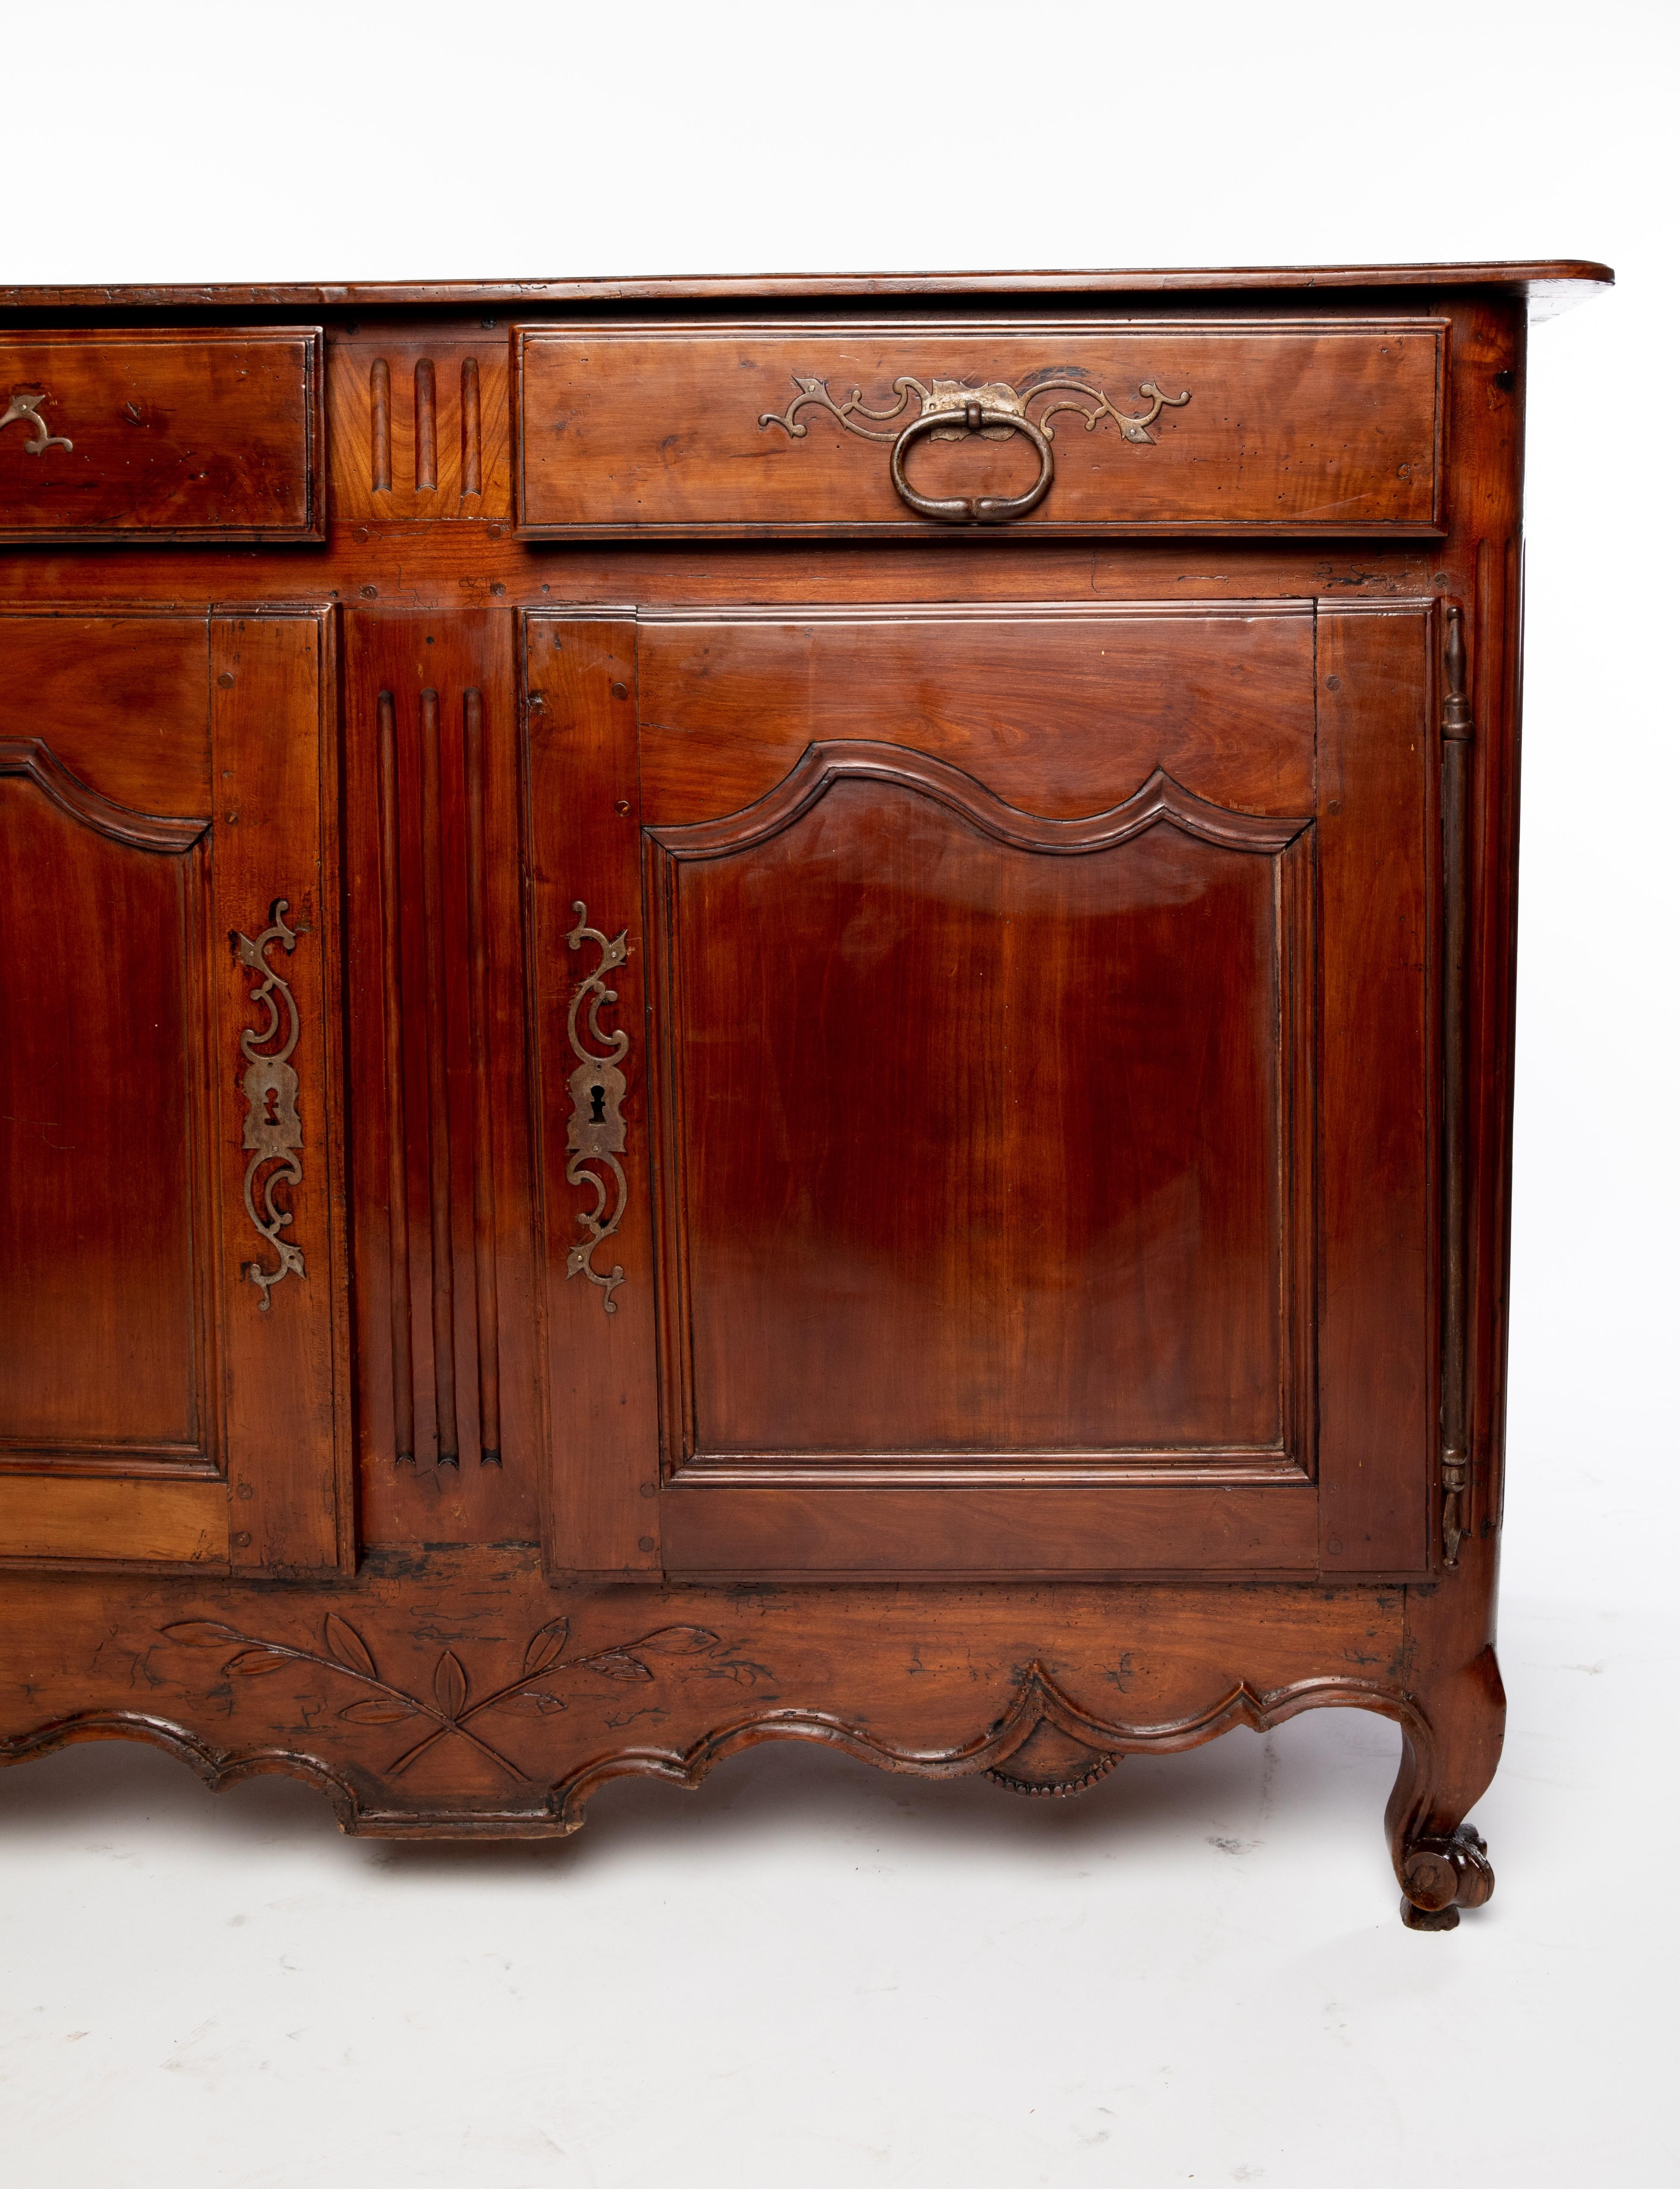 French Provincial Louis XV style fruitwood sideboard, 18th/ 19th c., rectangular case fitted with two drawers, over two cabinet doors on long exterior hinges, scalloped apron carved with crossed sprigs, rising on whorl feet, a separation between